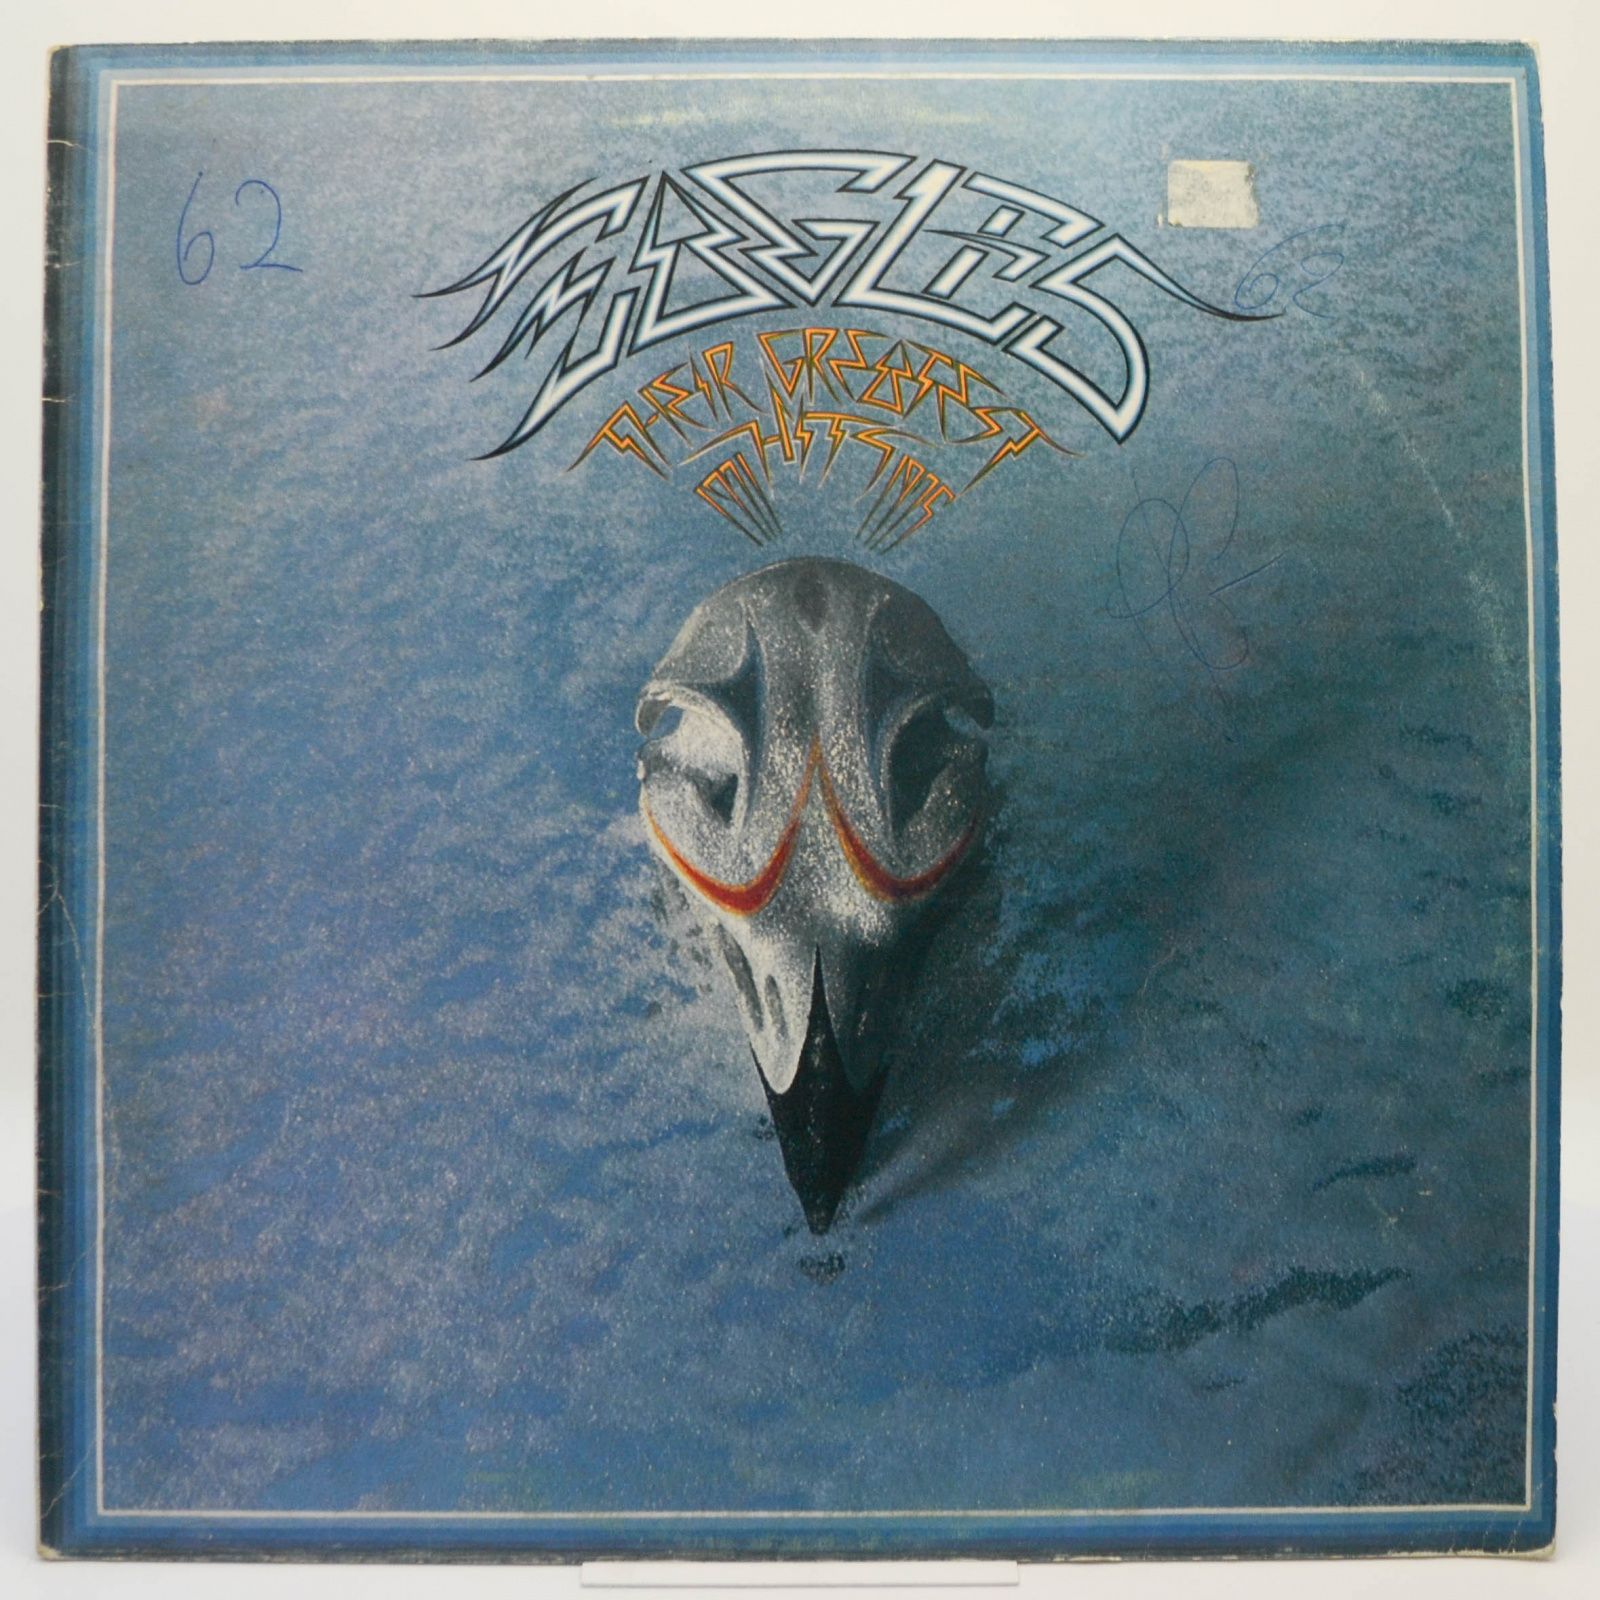 Eagles — Their Greatest Hits 1971-1975, 1976